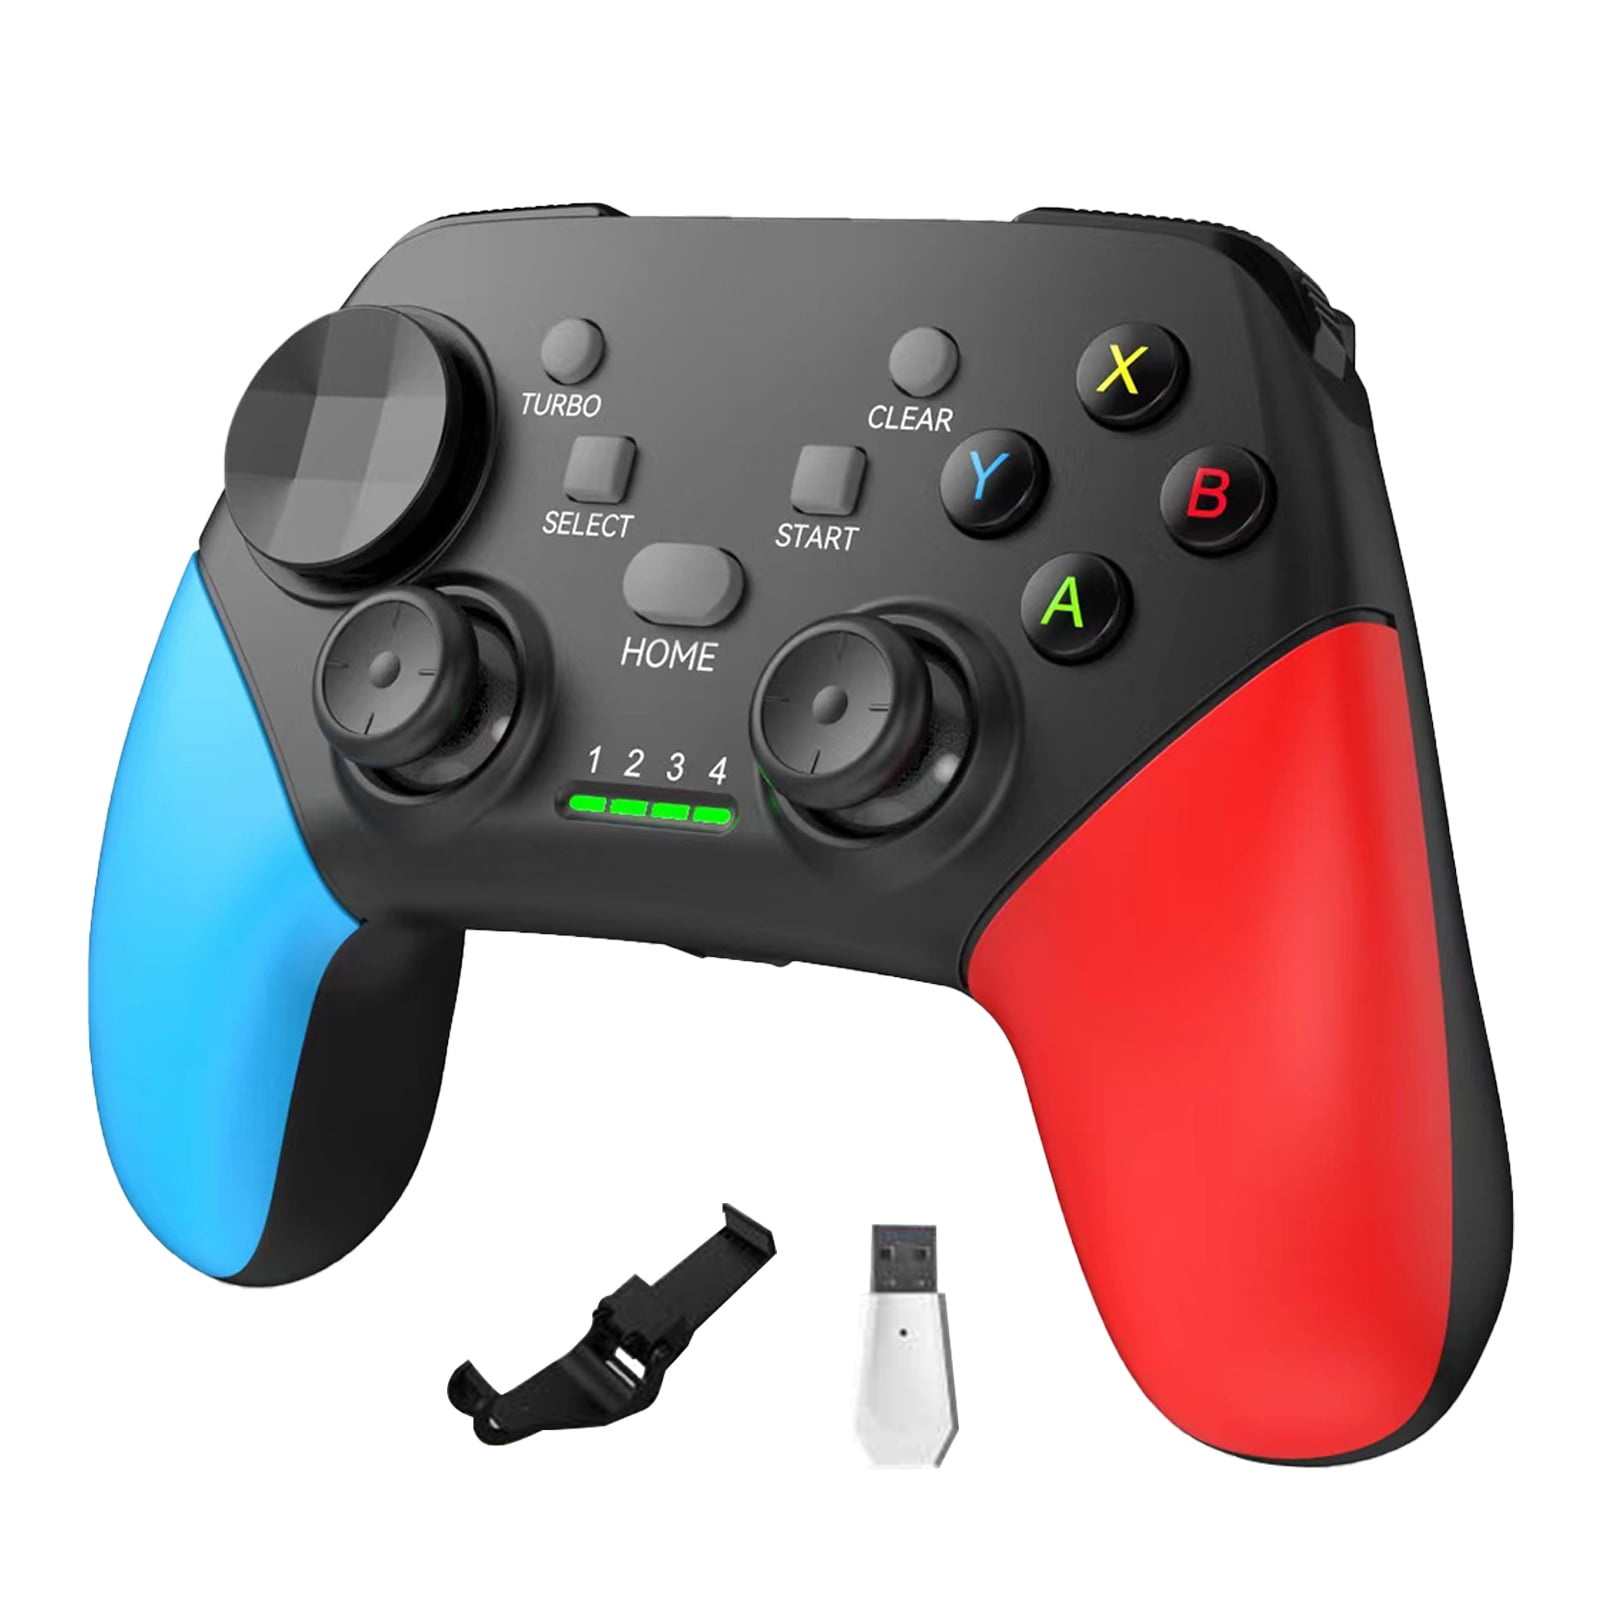 Symmetrie inrichting Visser BESTHUA Mobile Game Controller | Gaming Joystick Long-distance Operation |  Gamepad Controller Mobile Phone Game Controller, Built-in Battery Phone  Controller for Android Phone, PC Windows, Smart TV - Walmart.com